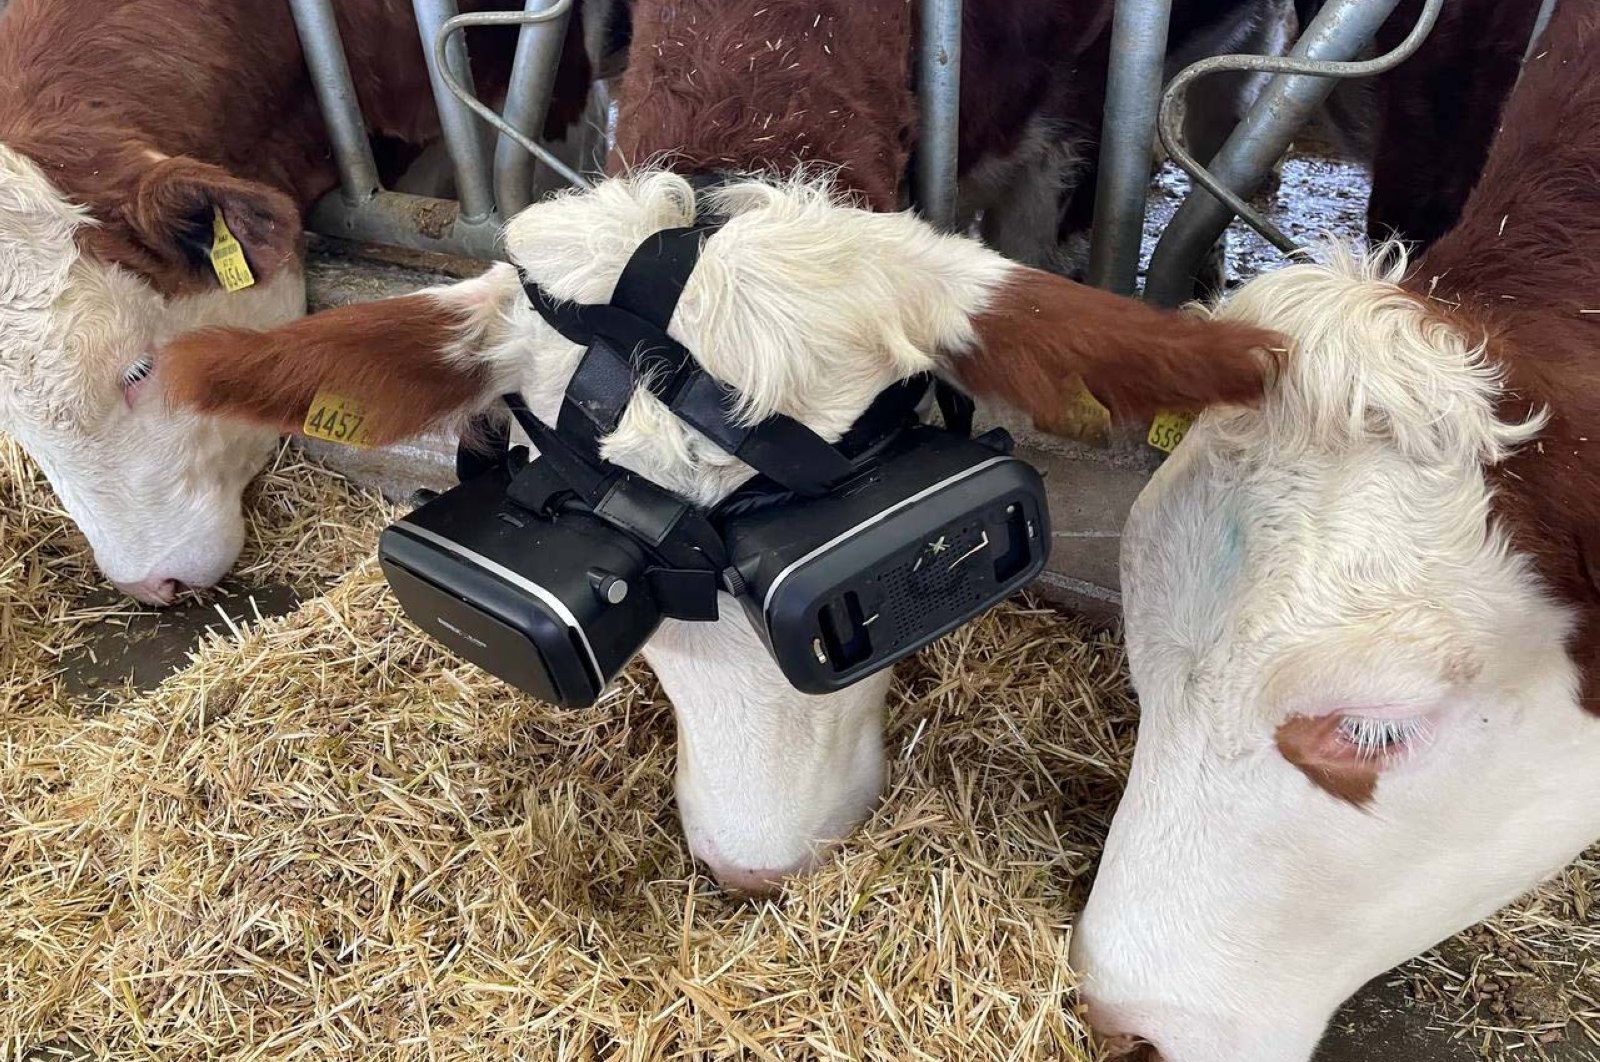 Turkish farmer tries virtual reality for more cow's milk | Daily Sabah